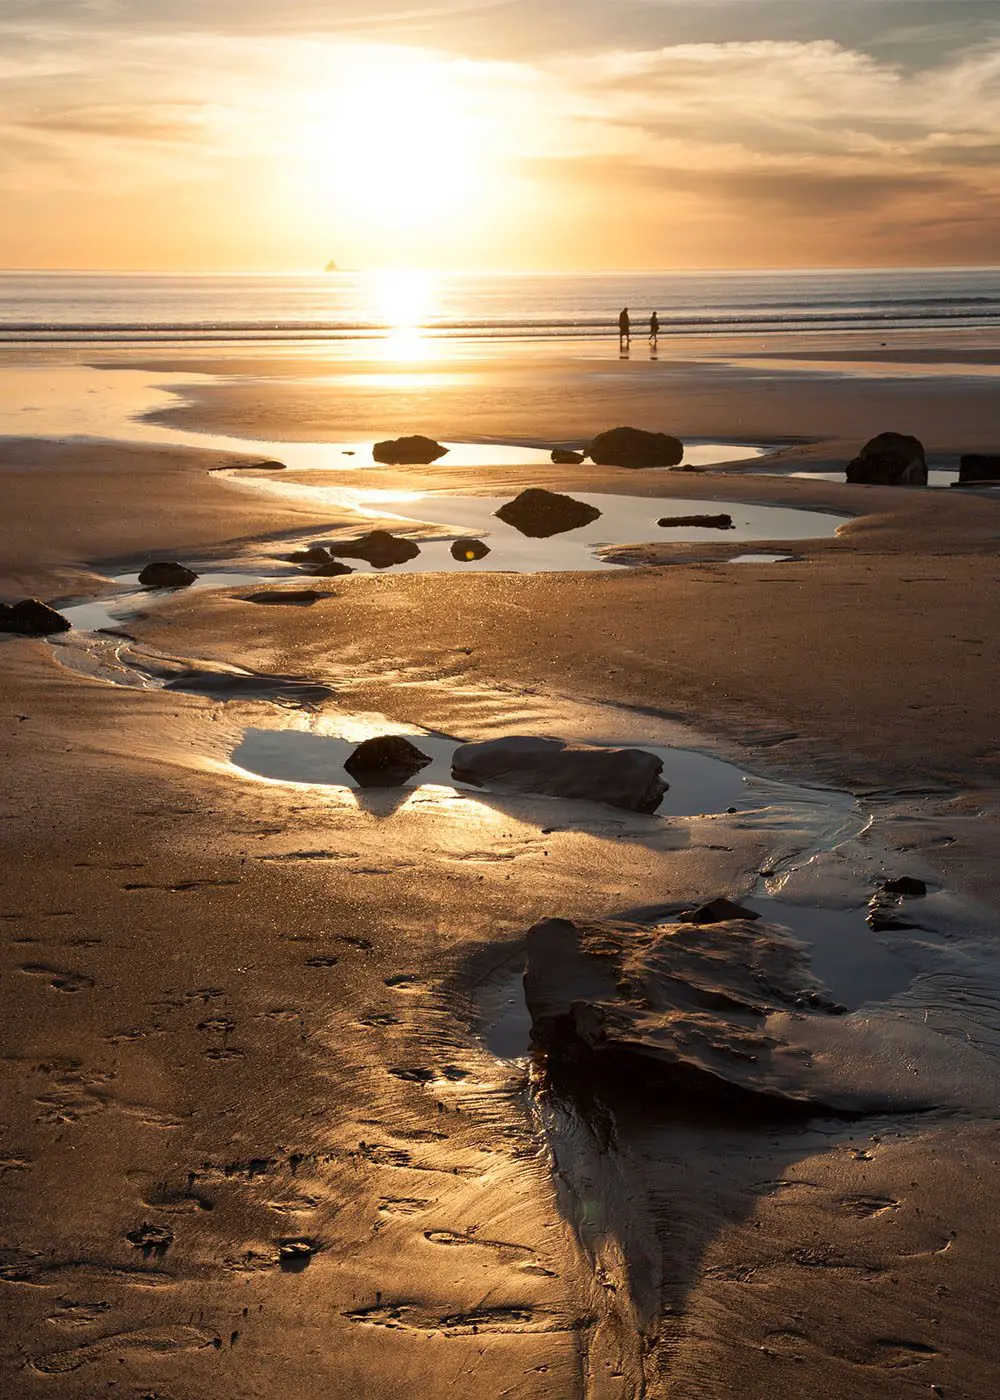 Sun setting over a beach with rocks and puddles on it